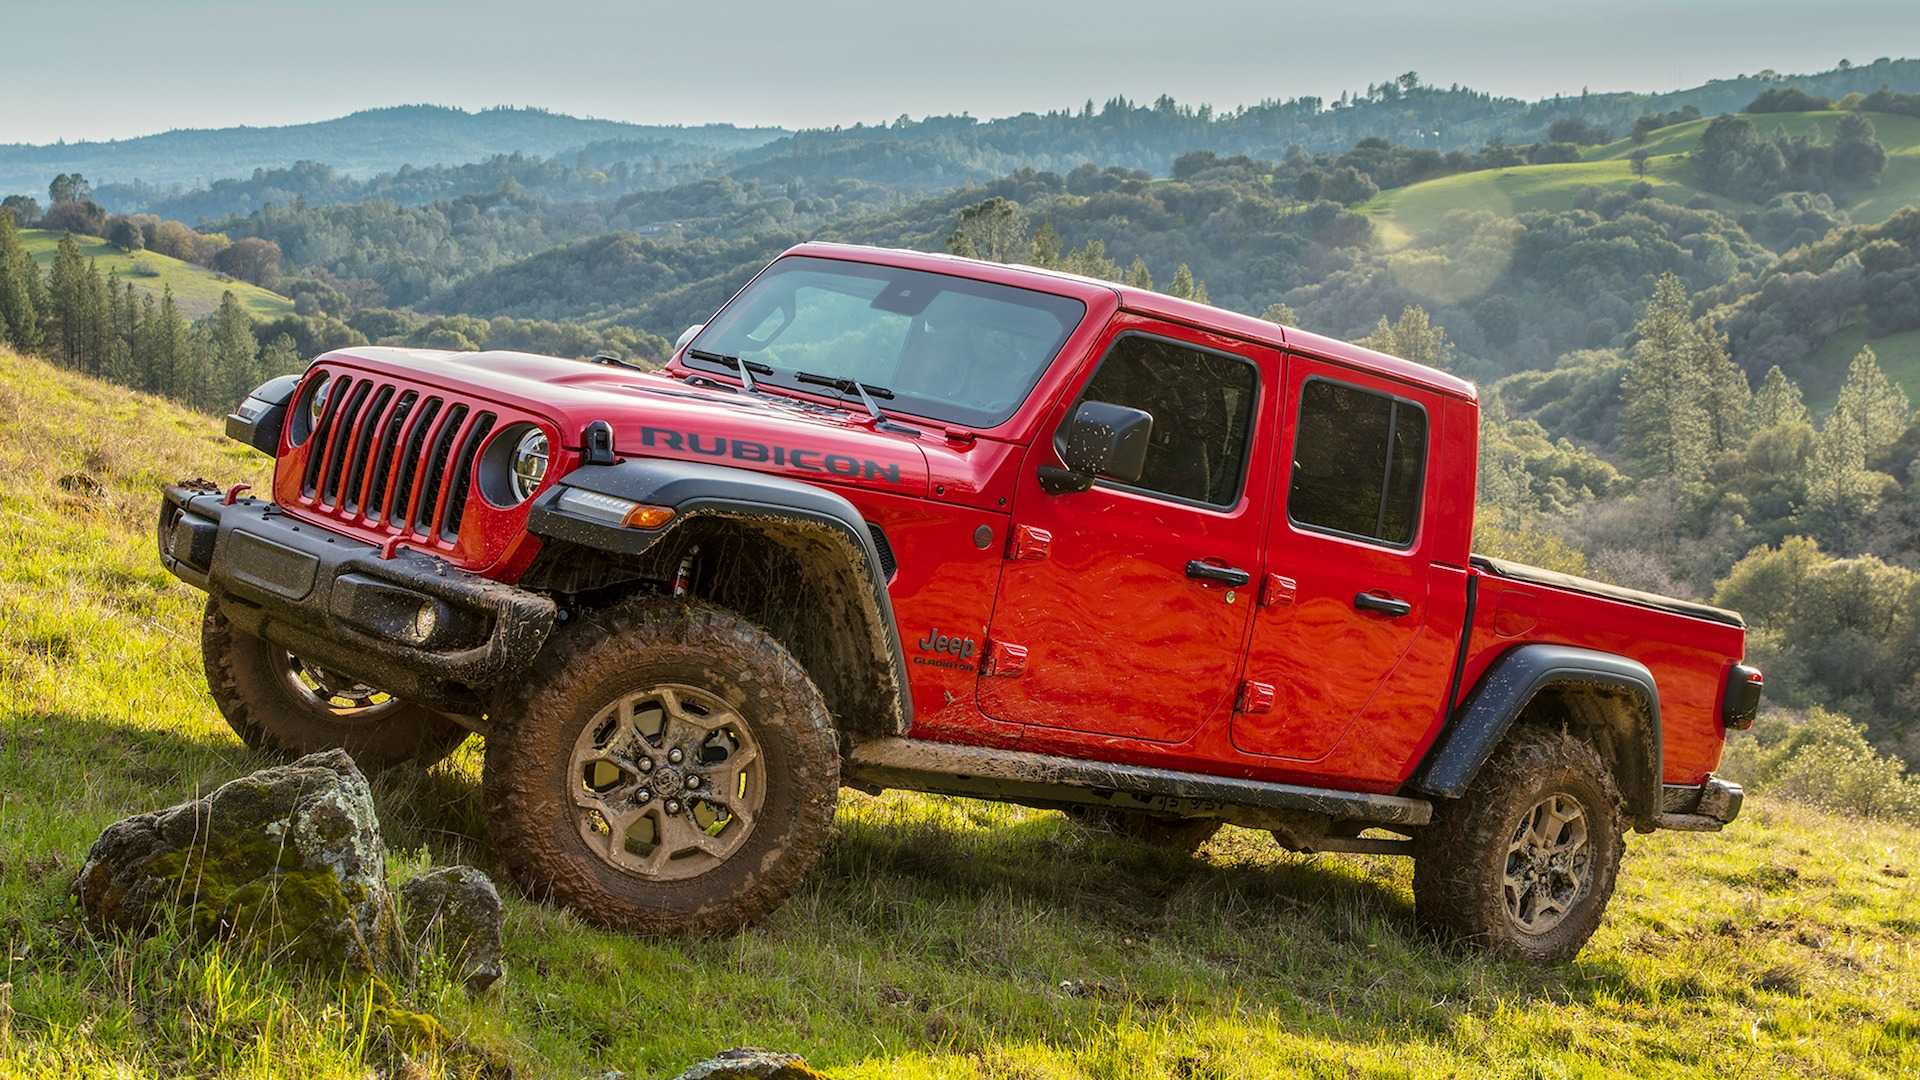 The Jeep Gladiator Finally Gets a 442 LB-FT Diesel for 2021